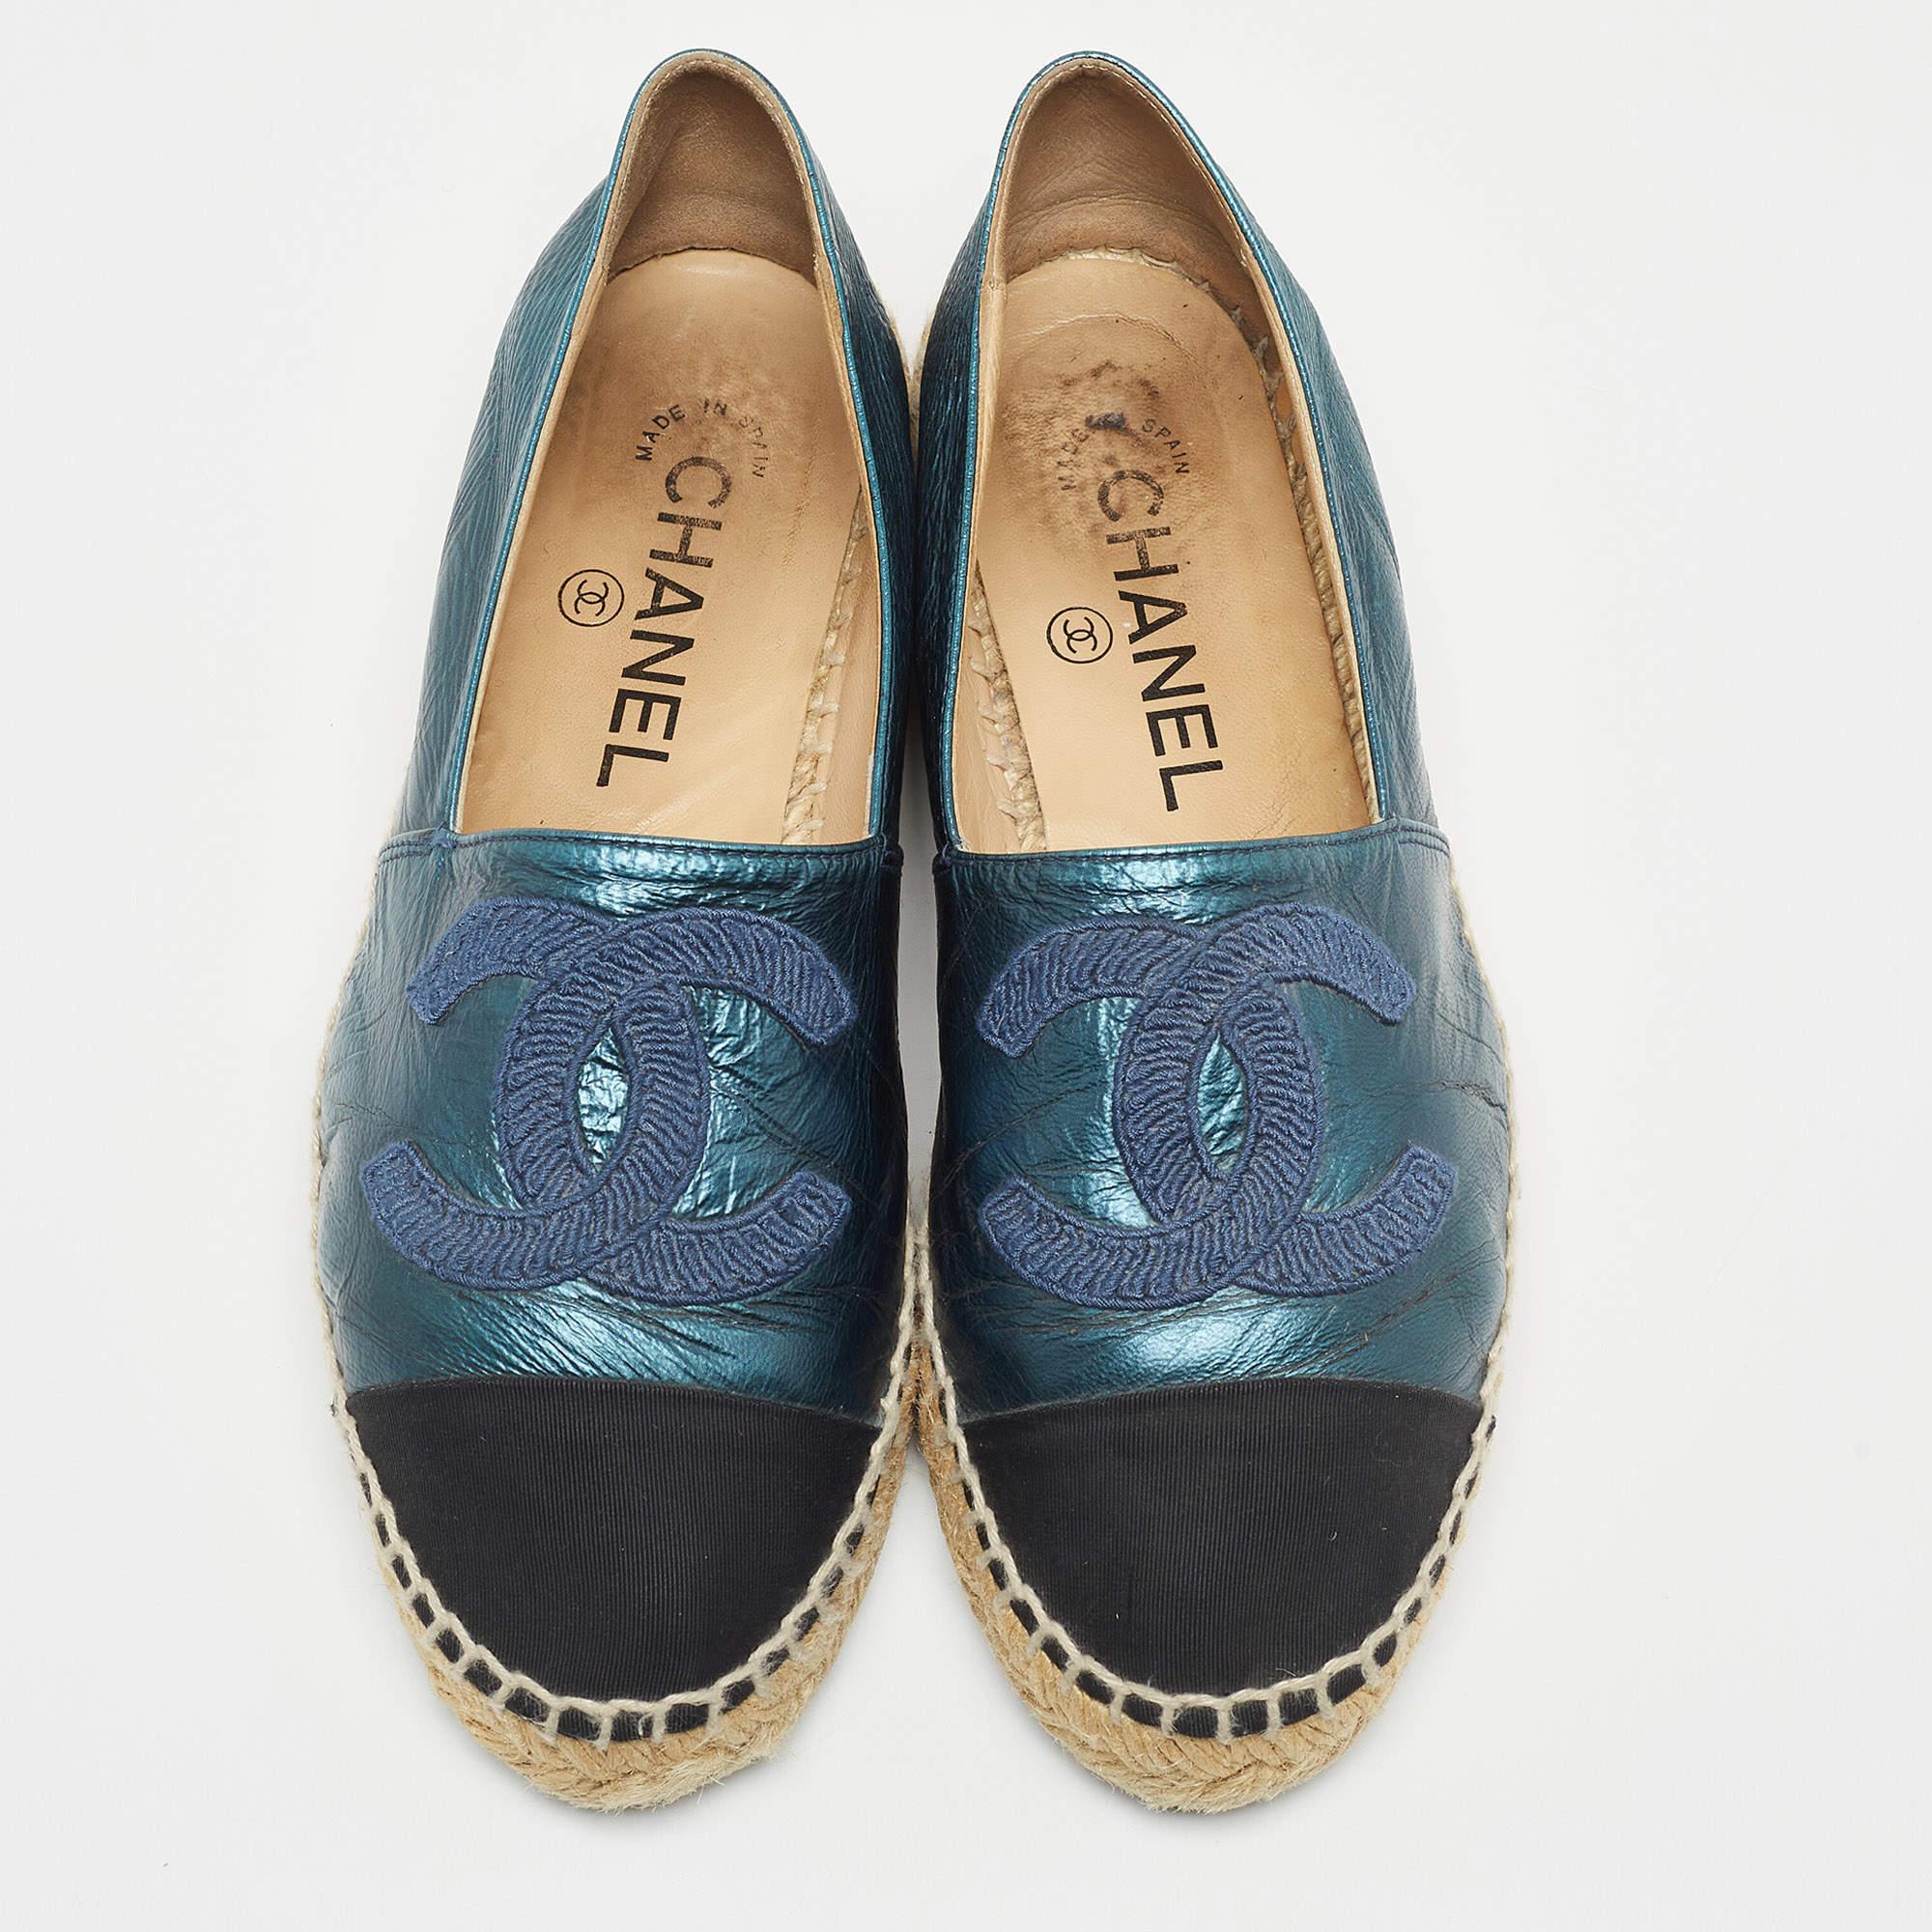 Let this comfortable pair be your first choice when you're out for a long day. These Chanel espadrilles have well-sewn uppers beautifully set on durable soles.

